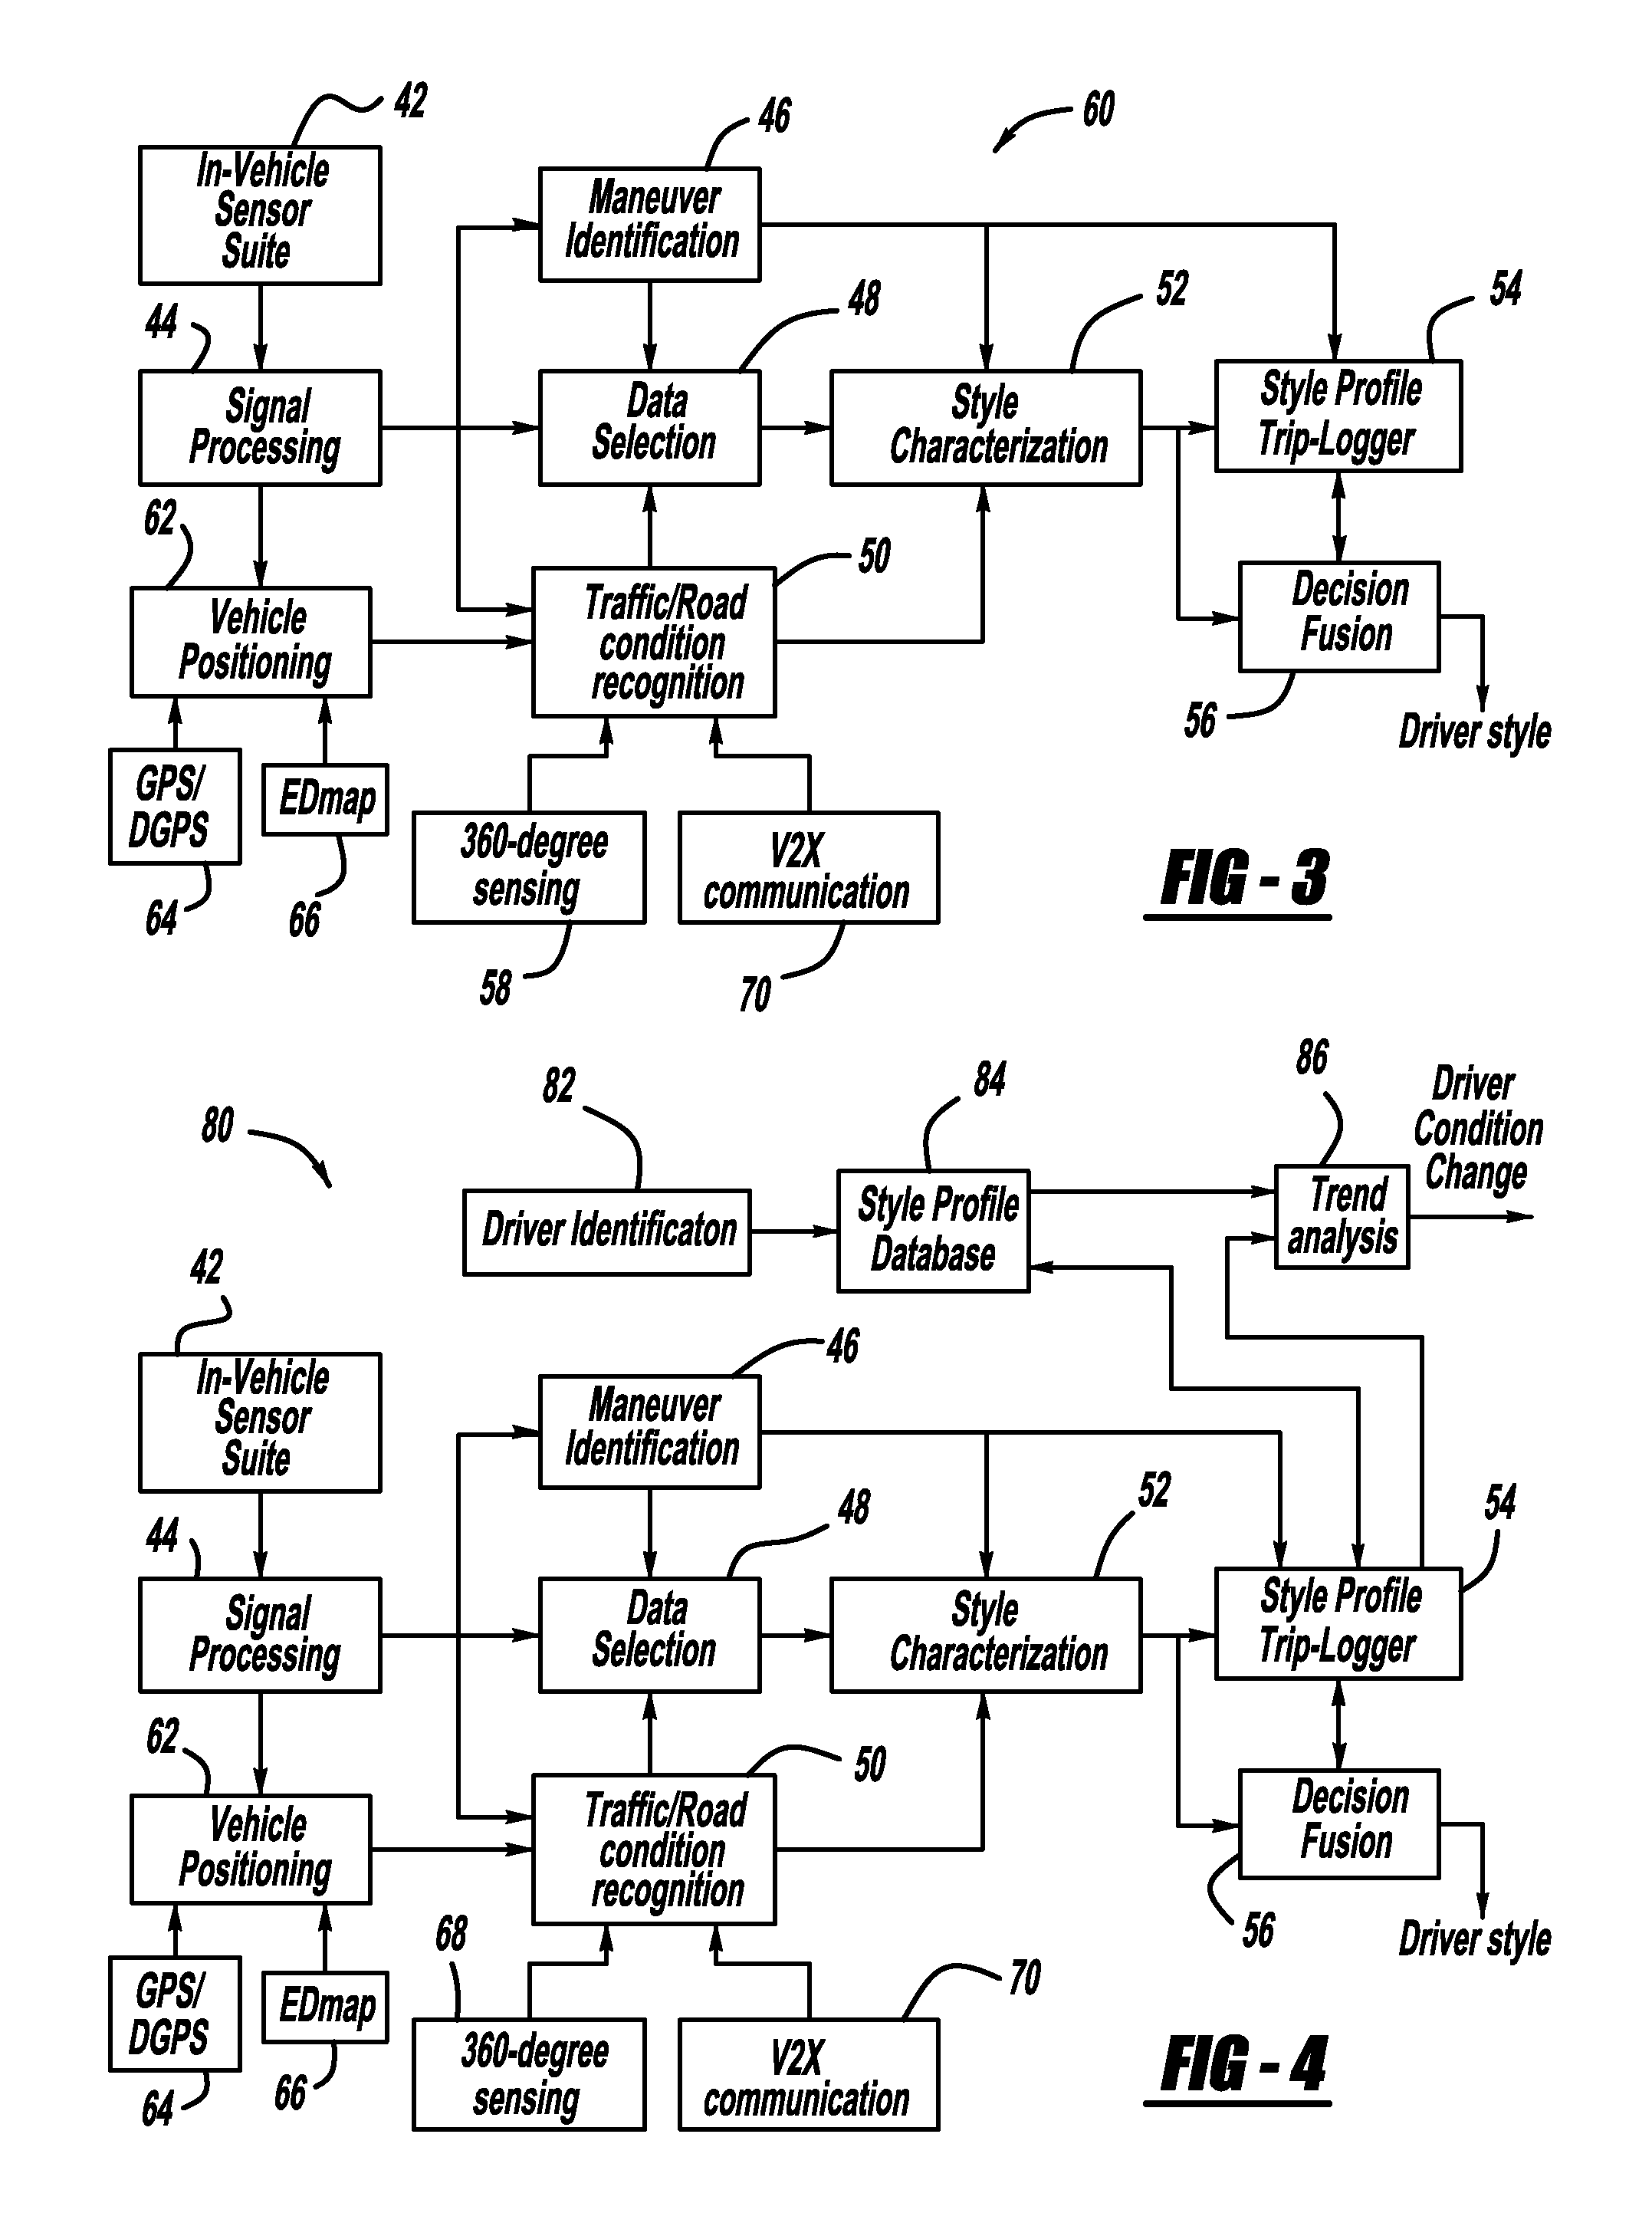 Adaptive vehicle control system with driving style recognition based on lane-change maneuvers